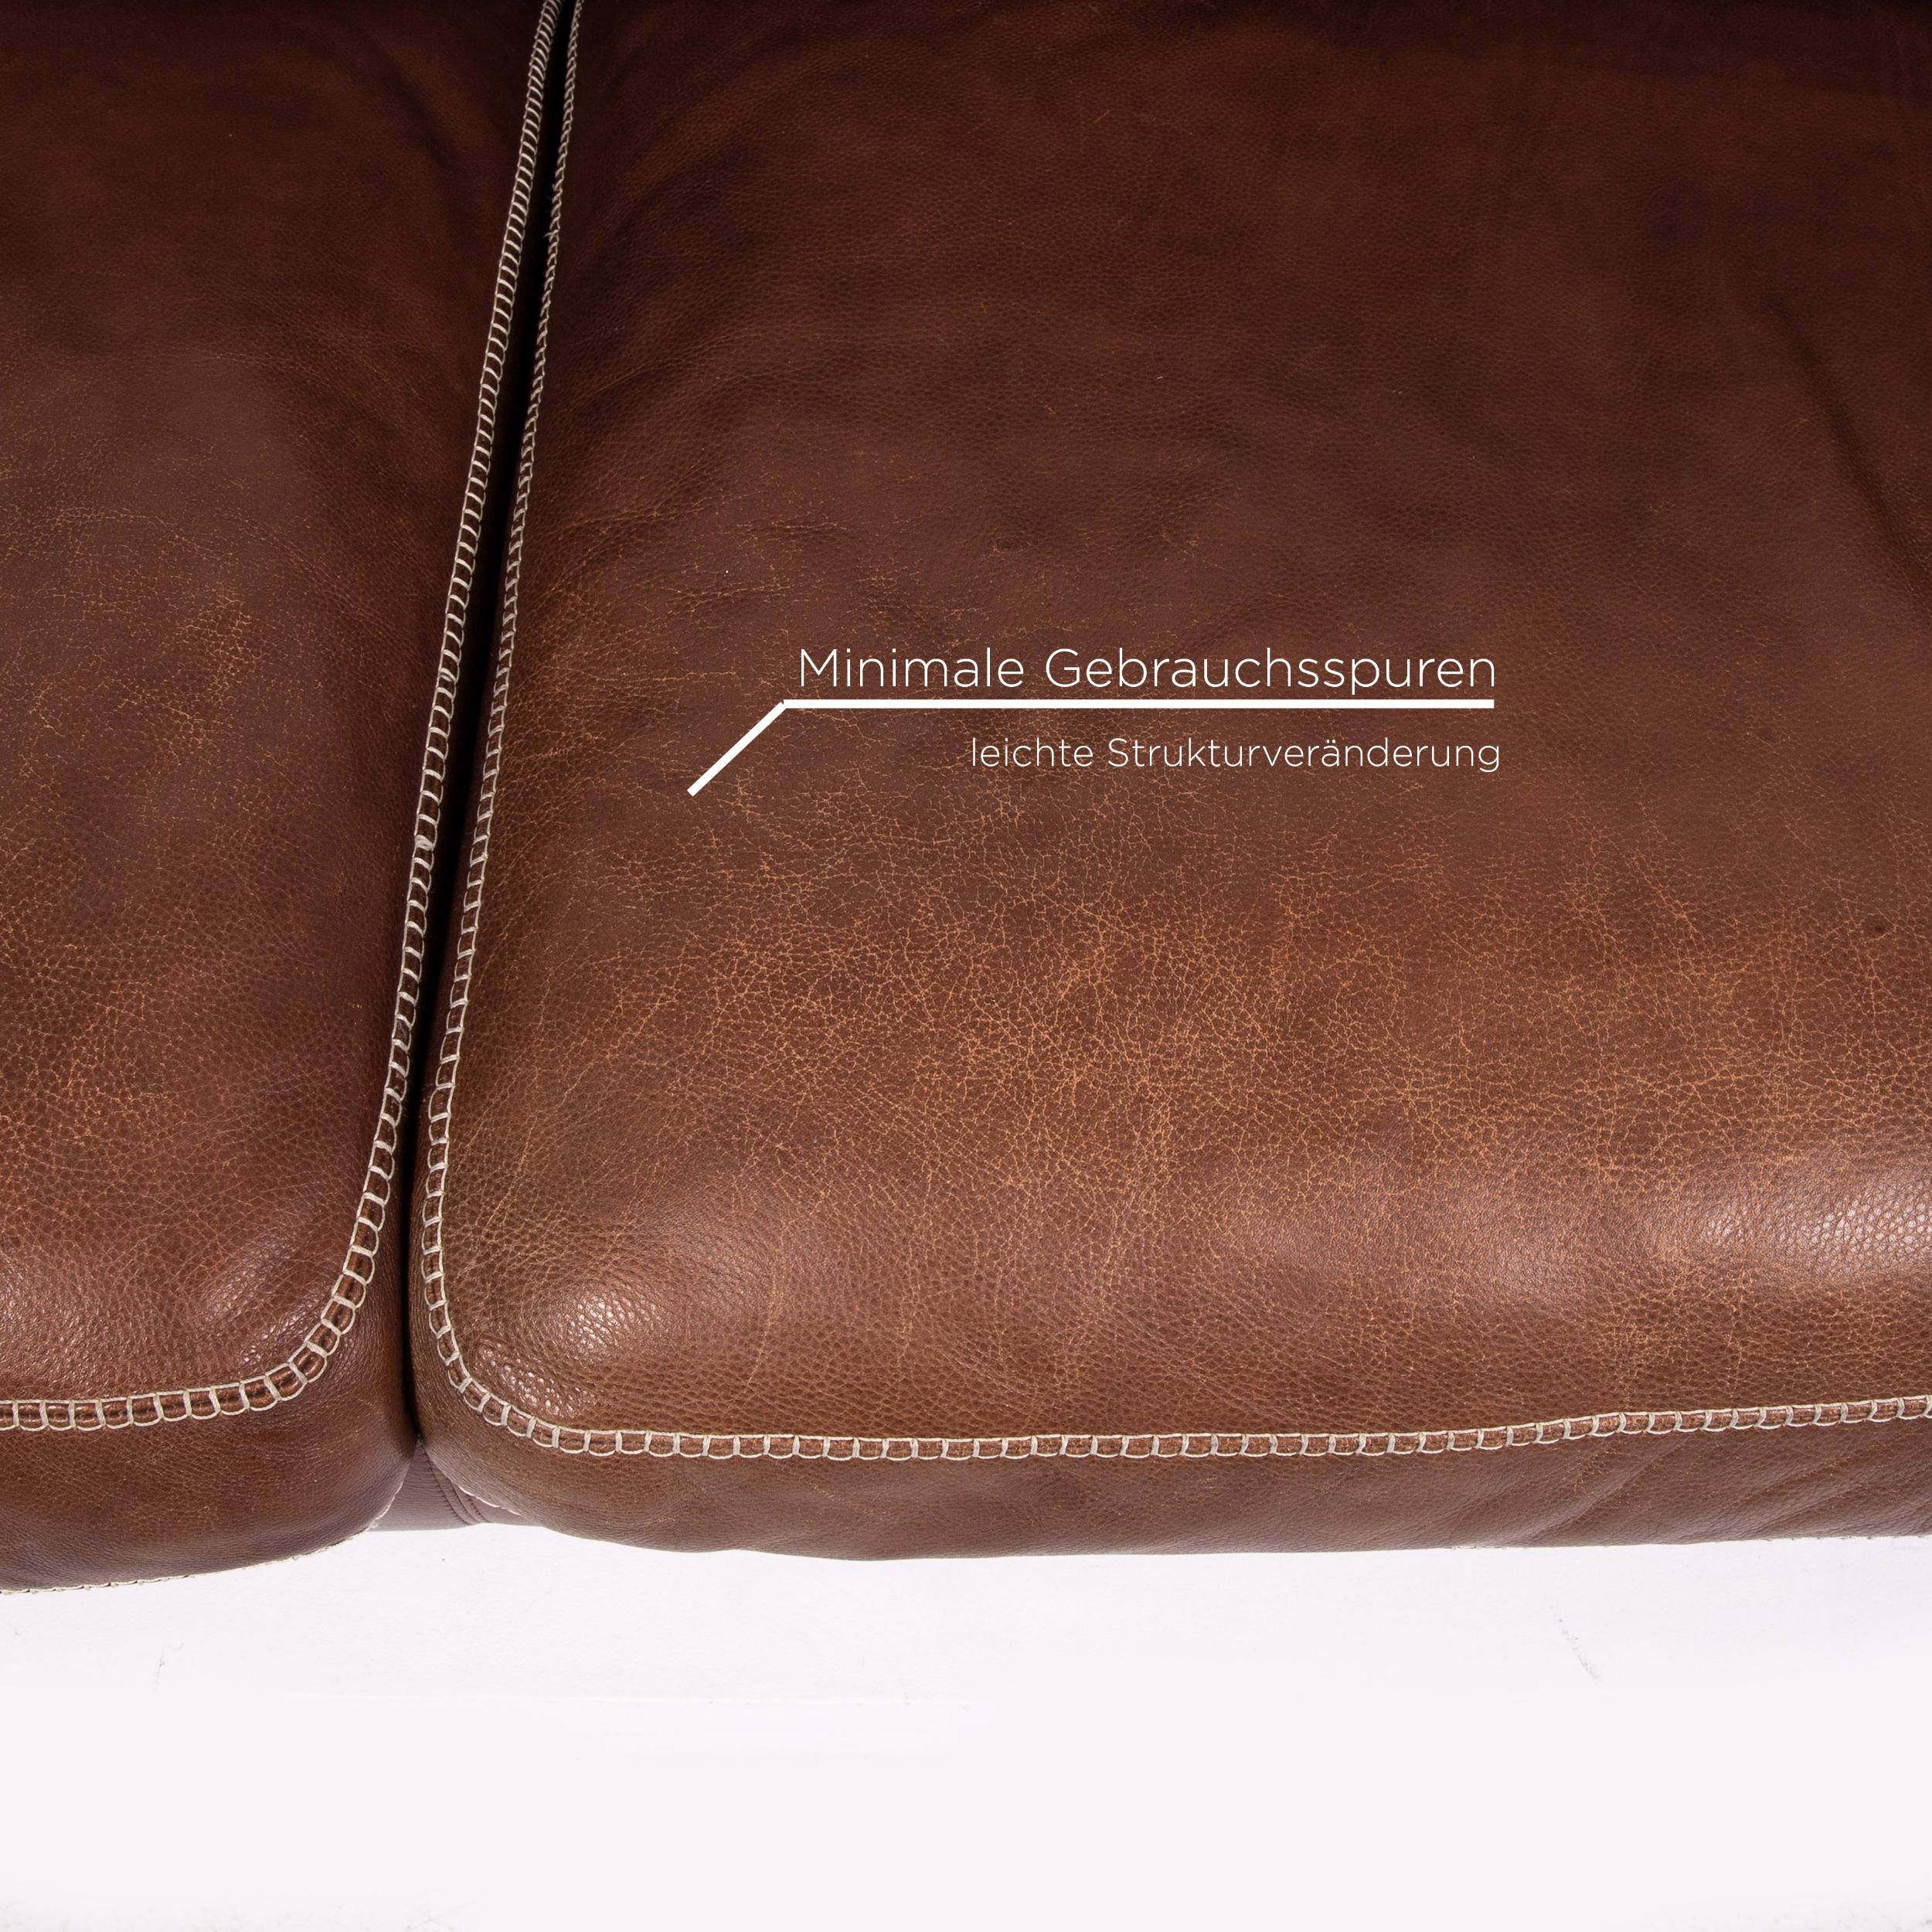 Machalke Valentino Leather Sofa Brown Three-Seat Couch In Good Condition For Sale In Cologne, DE